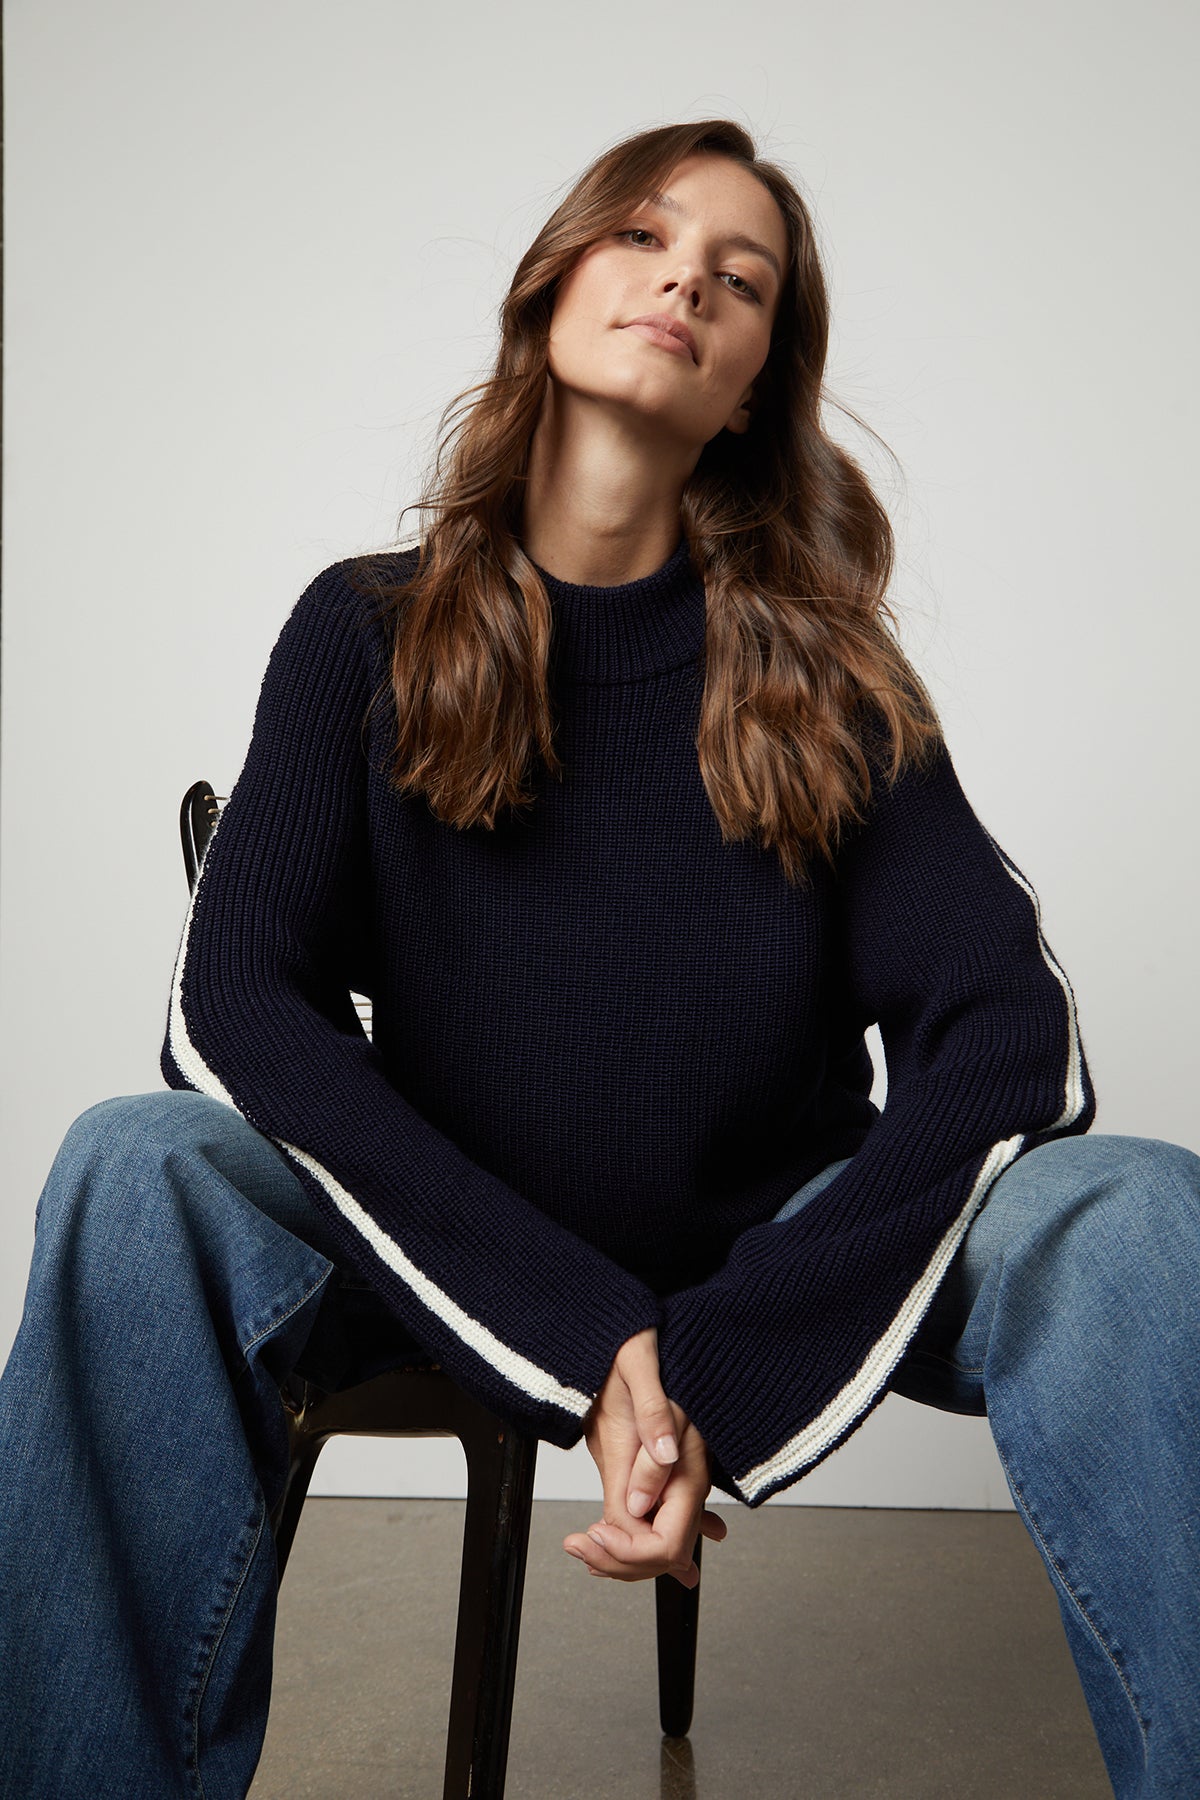   The model is sitting on a chair wearing cozy jeans and a Velvet by Graham & Spencer TEAGAN MOCK NECK SWEATER. 